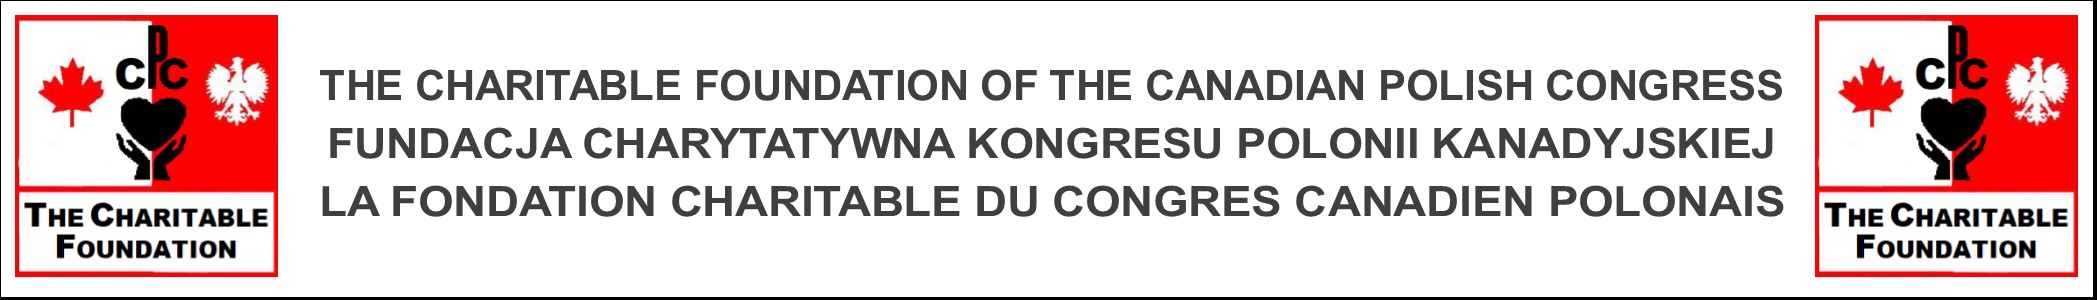 Charitable Foundation of The Canadian Polish Congress